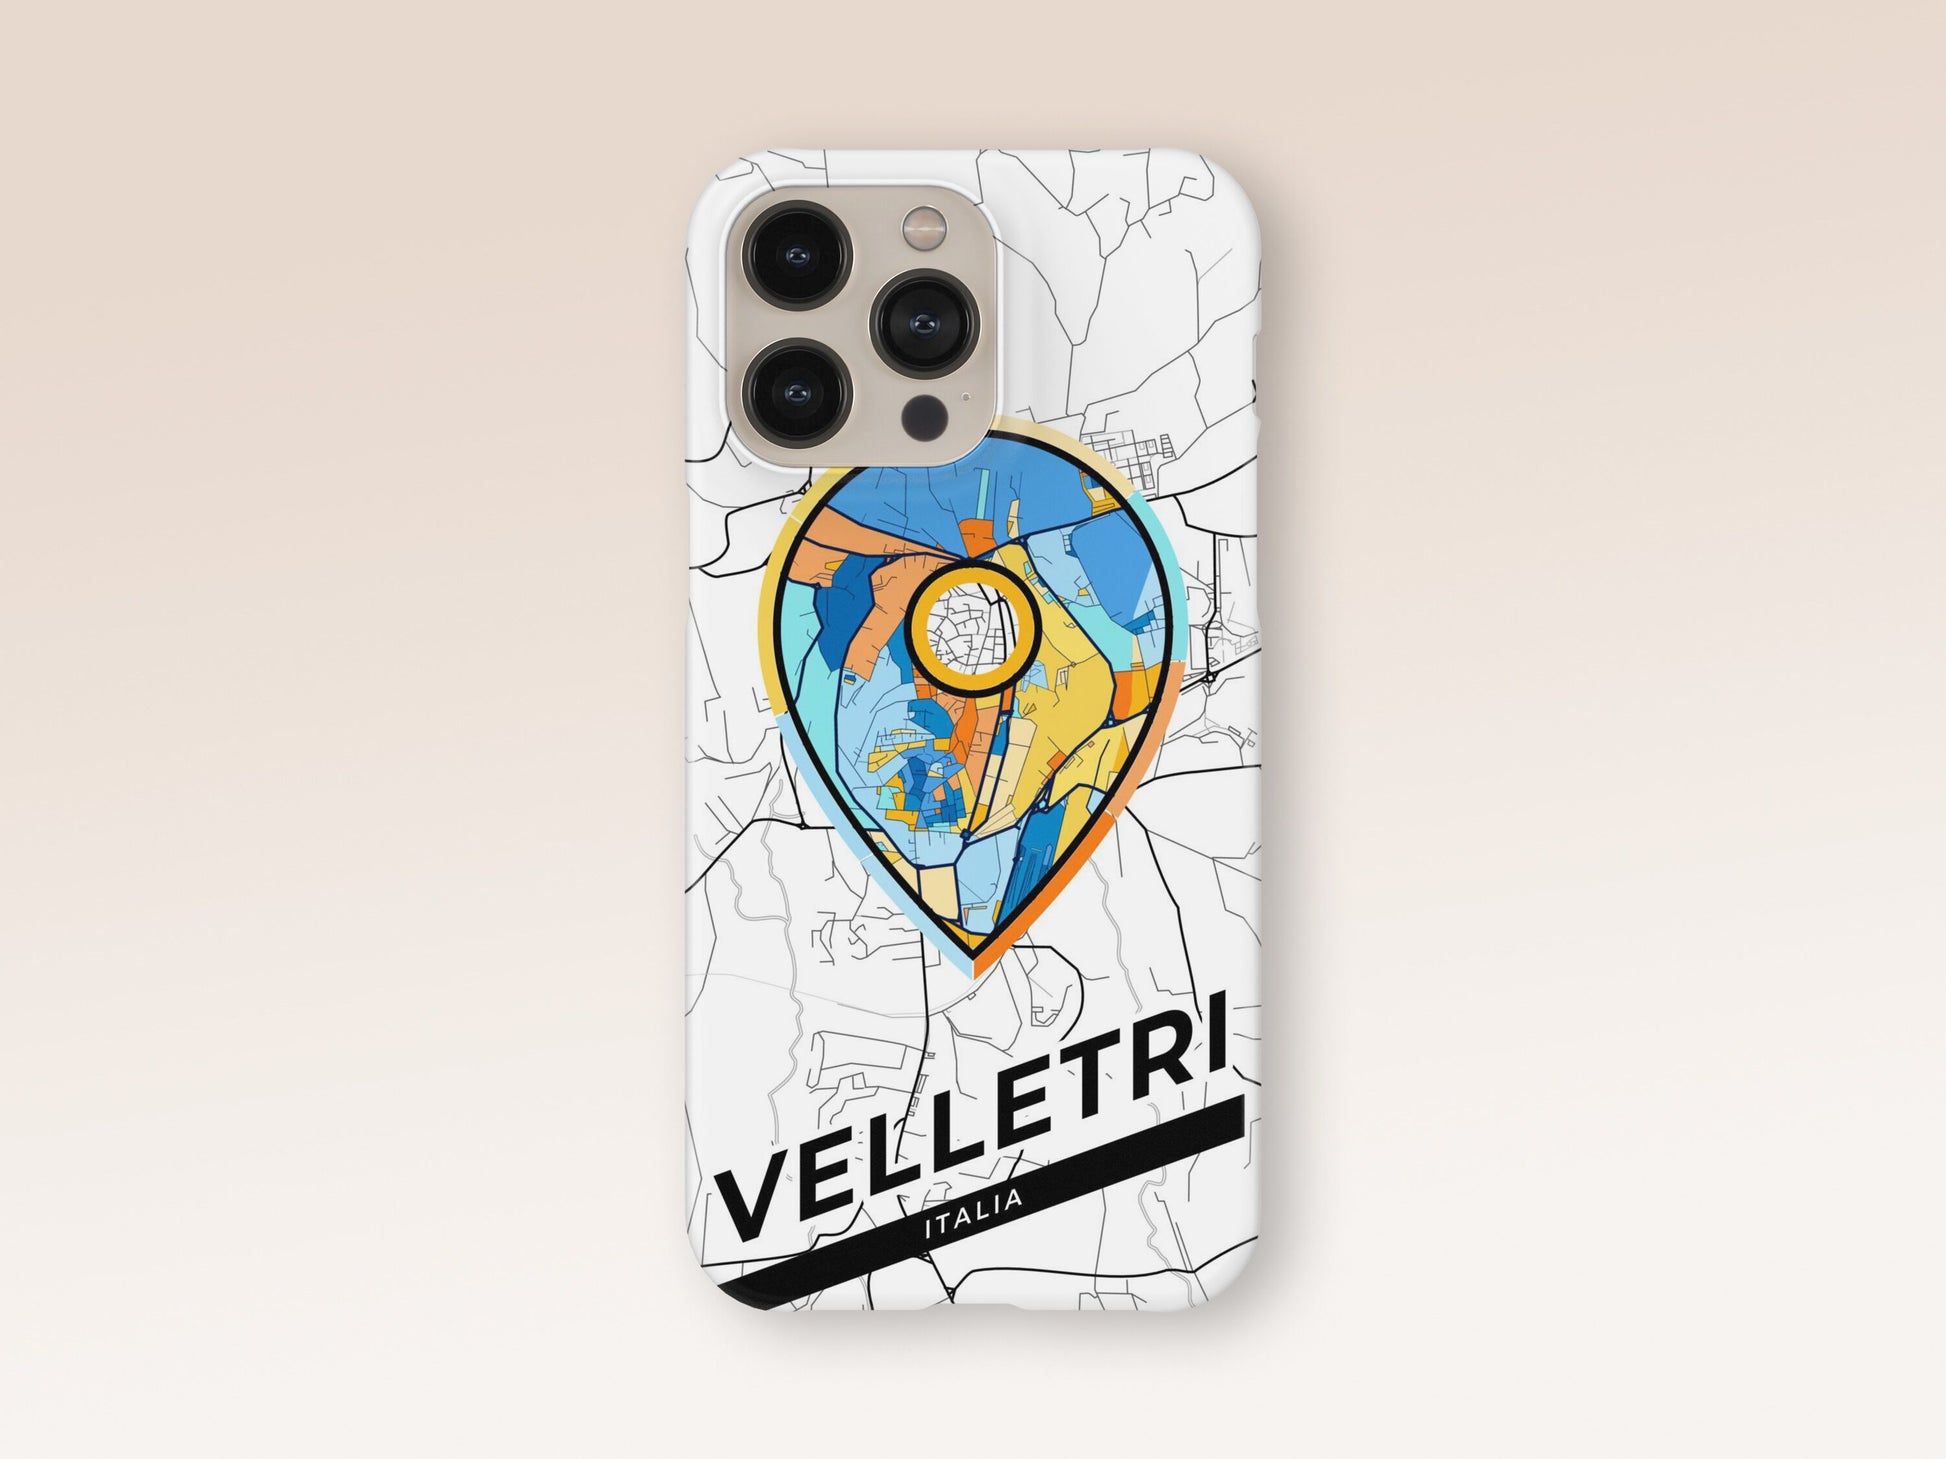 Velletri Italy slim phone case with colorful icon 1